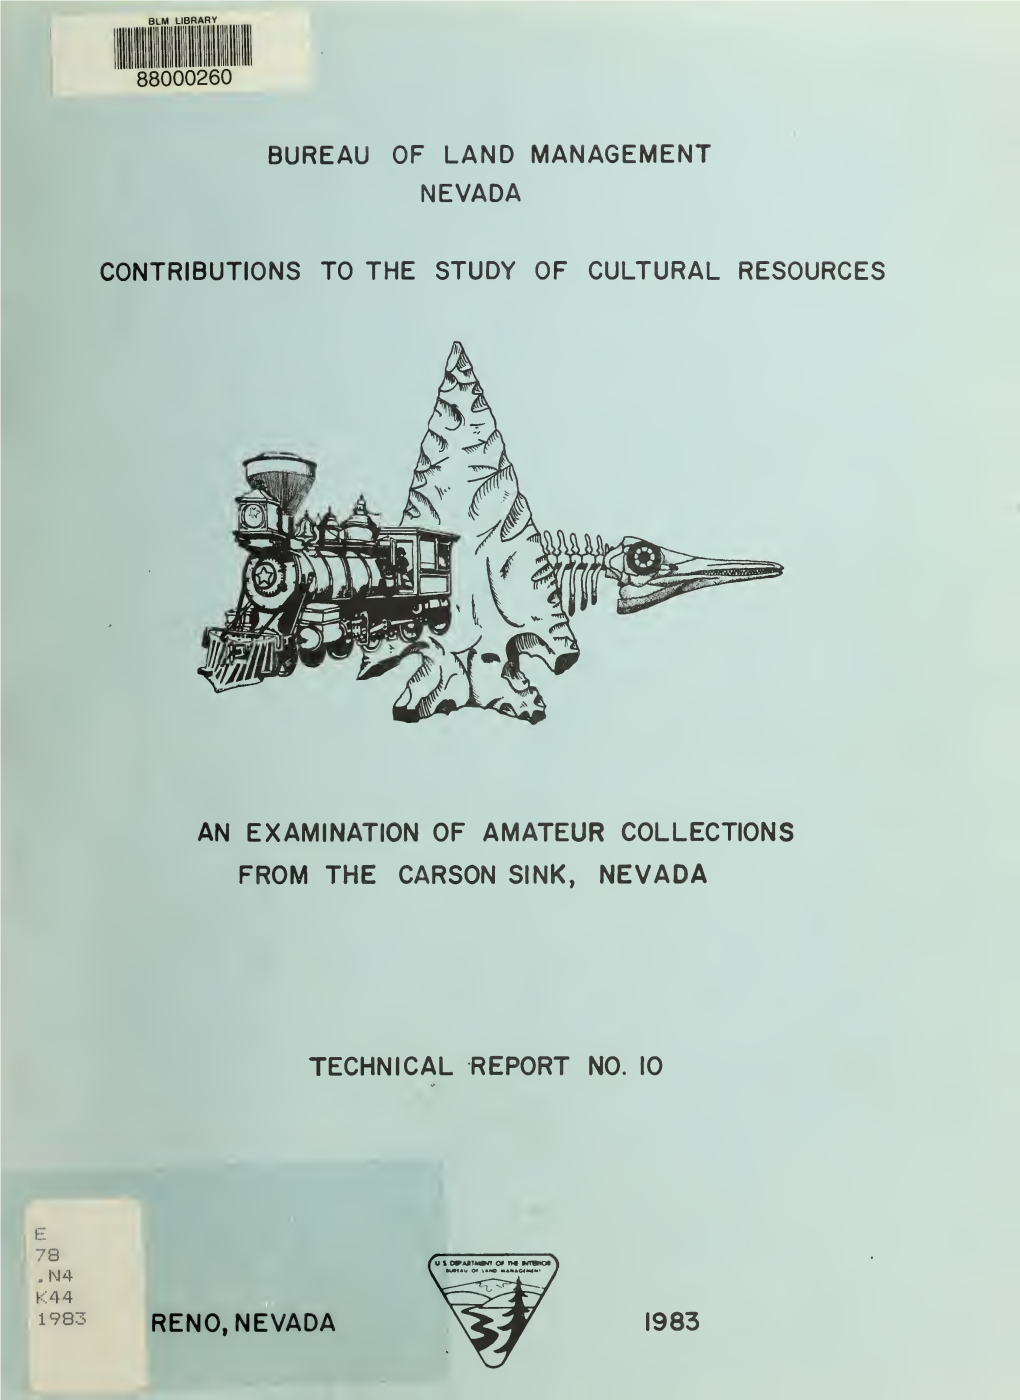 An Examination of Amateur Collections from the Carson Sink, Nevada